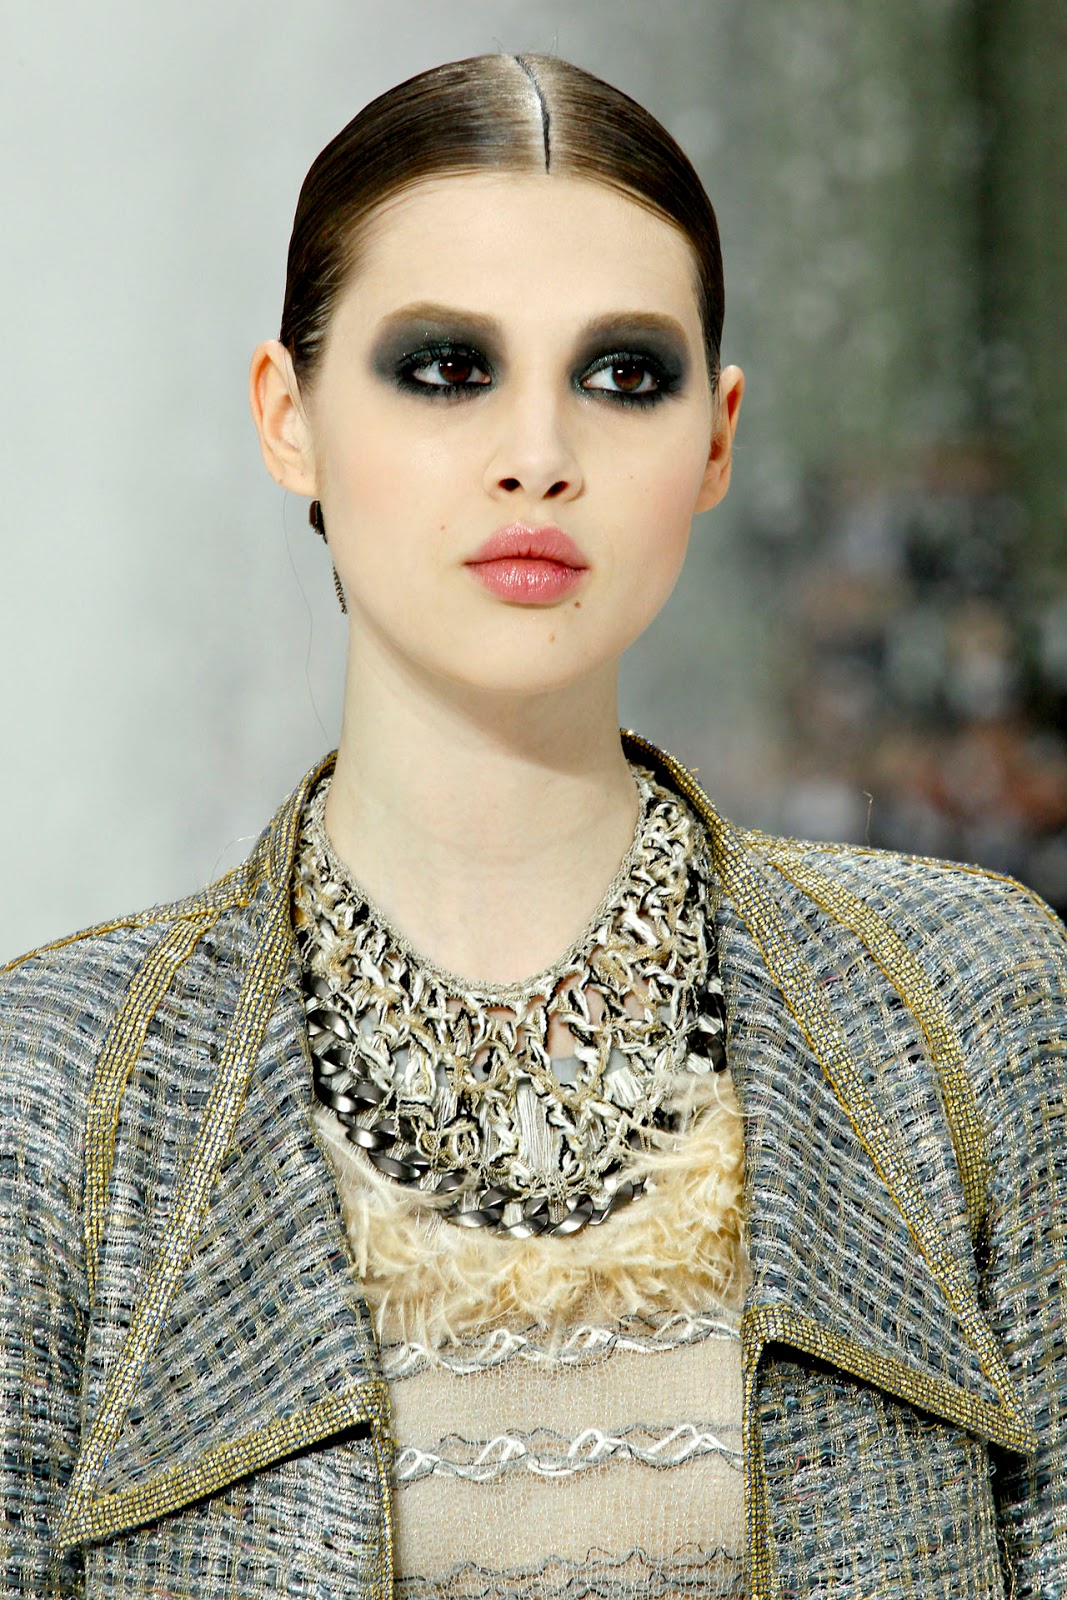 CHANEL SS'11 ready to wear